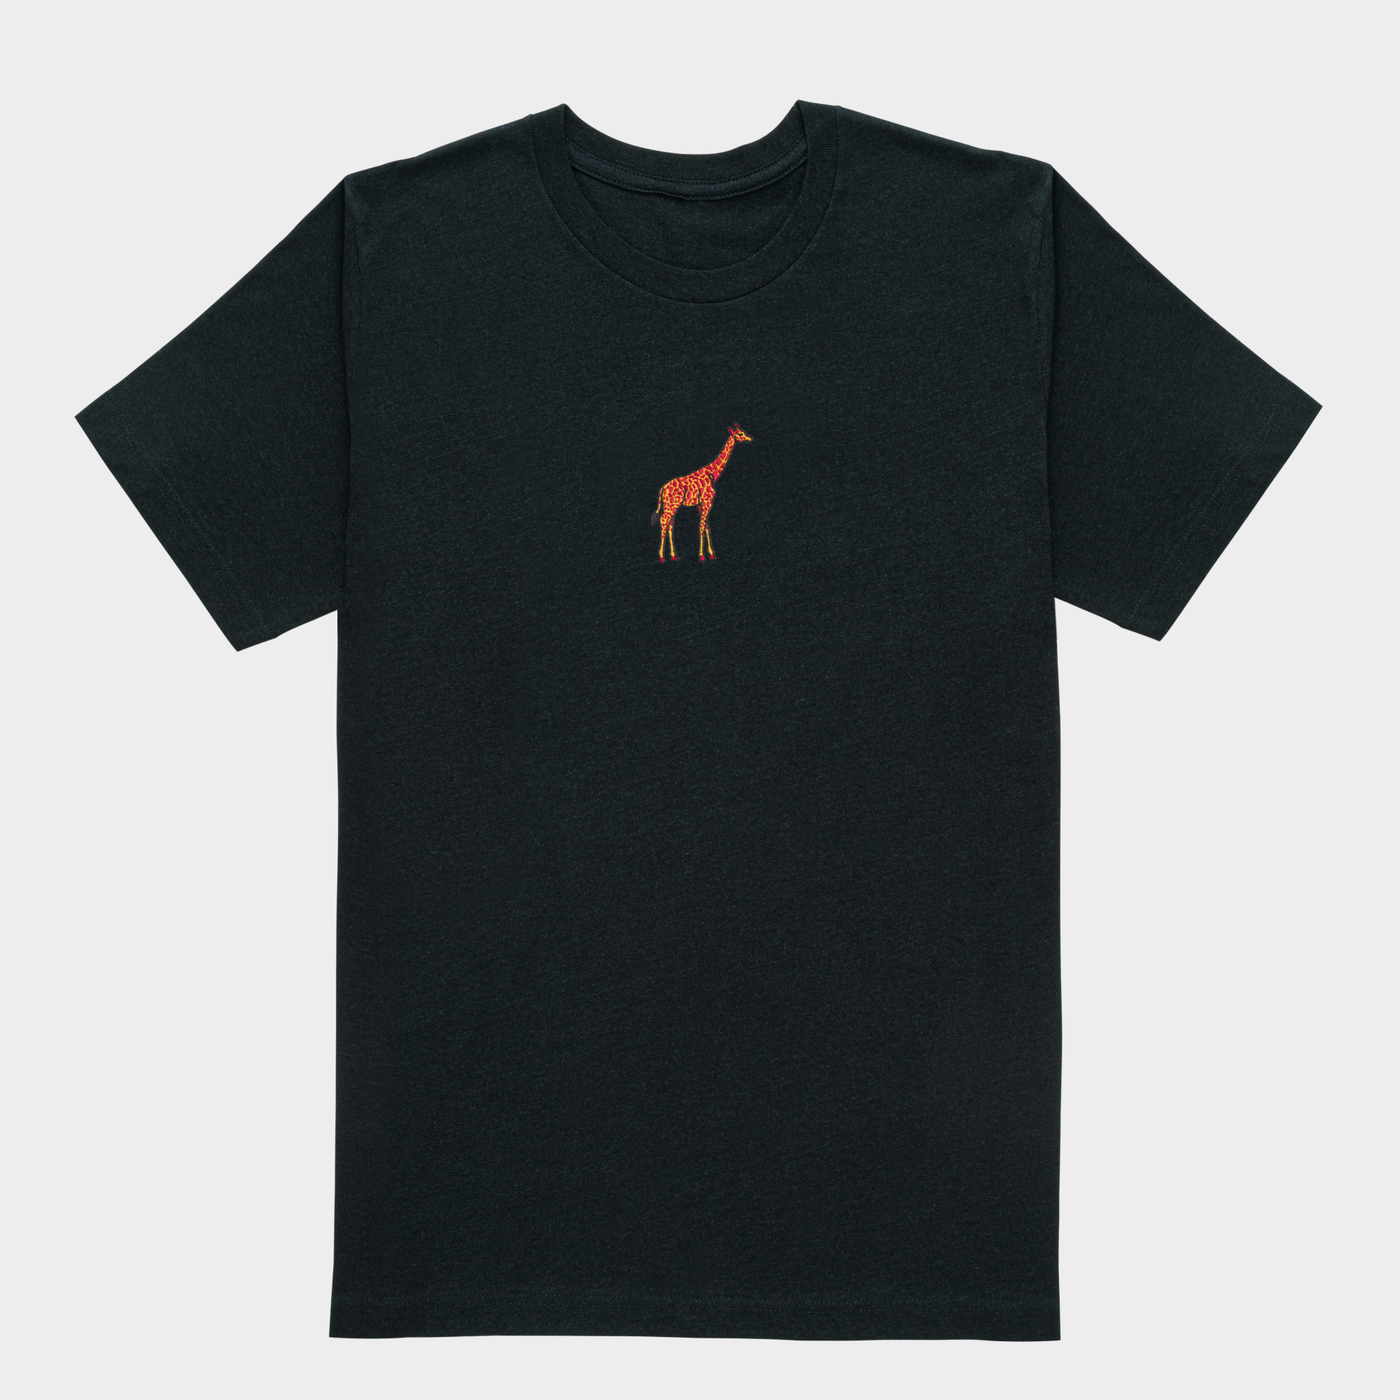 Bobby's Planet Men's Embroidered Giraffe T-Shirt from African Animals Collection in Black Heather Color#color_black-heather